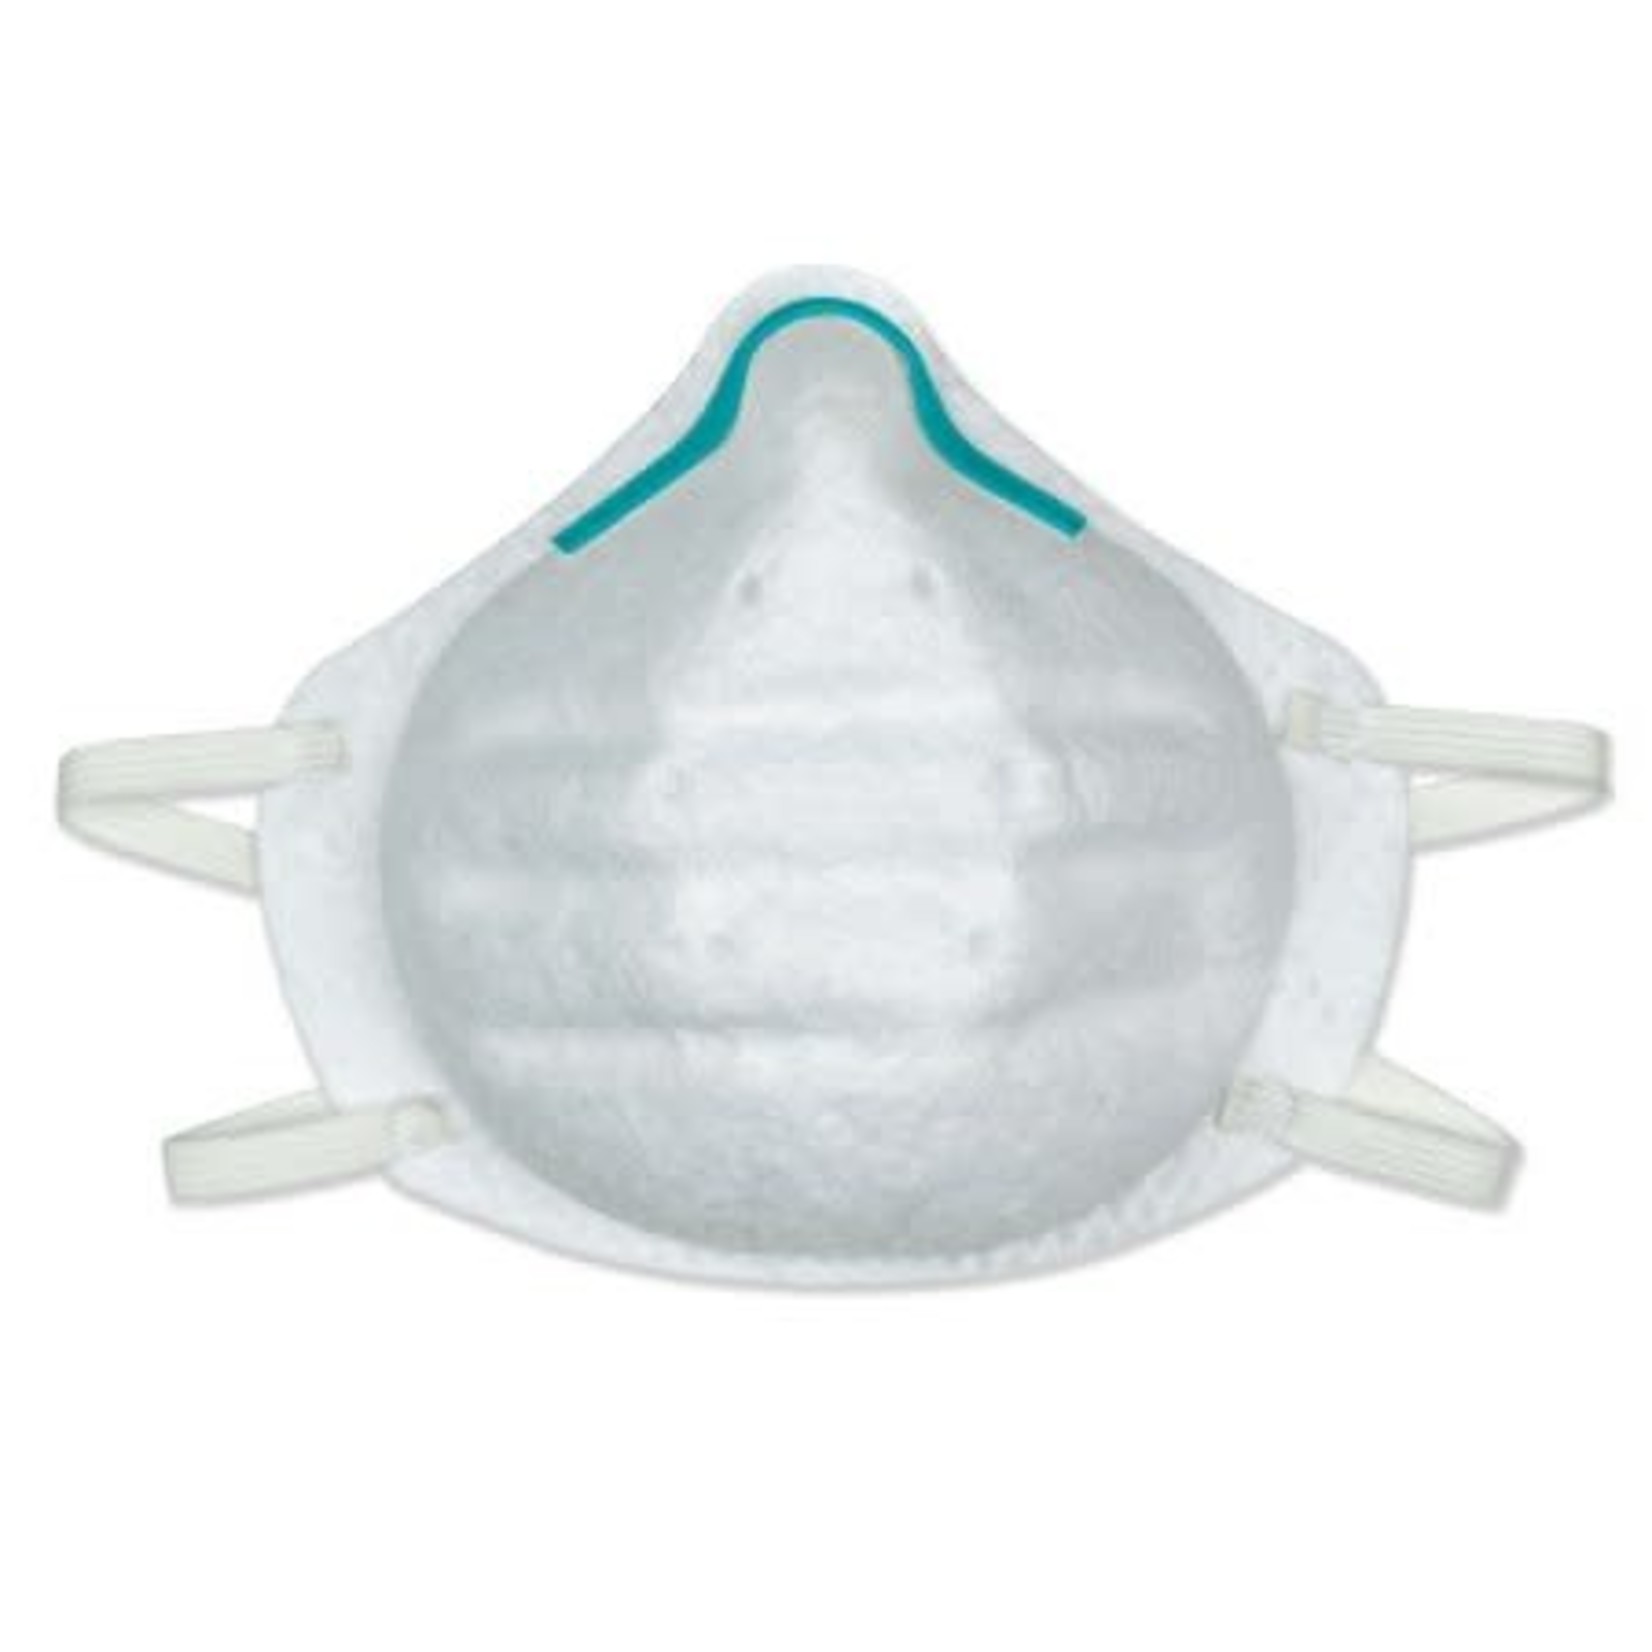 Particulate Respirator Mask N95 Cup Elastic Strap One Size Fits Most White NonSterile ASTM F1862 Adult 20/BX